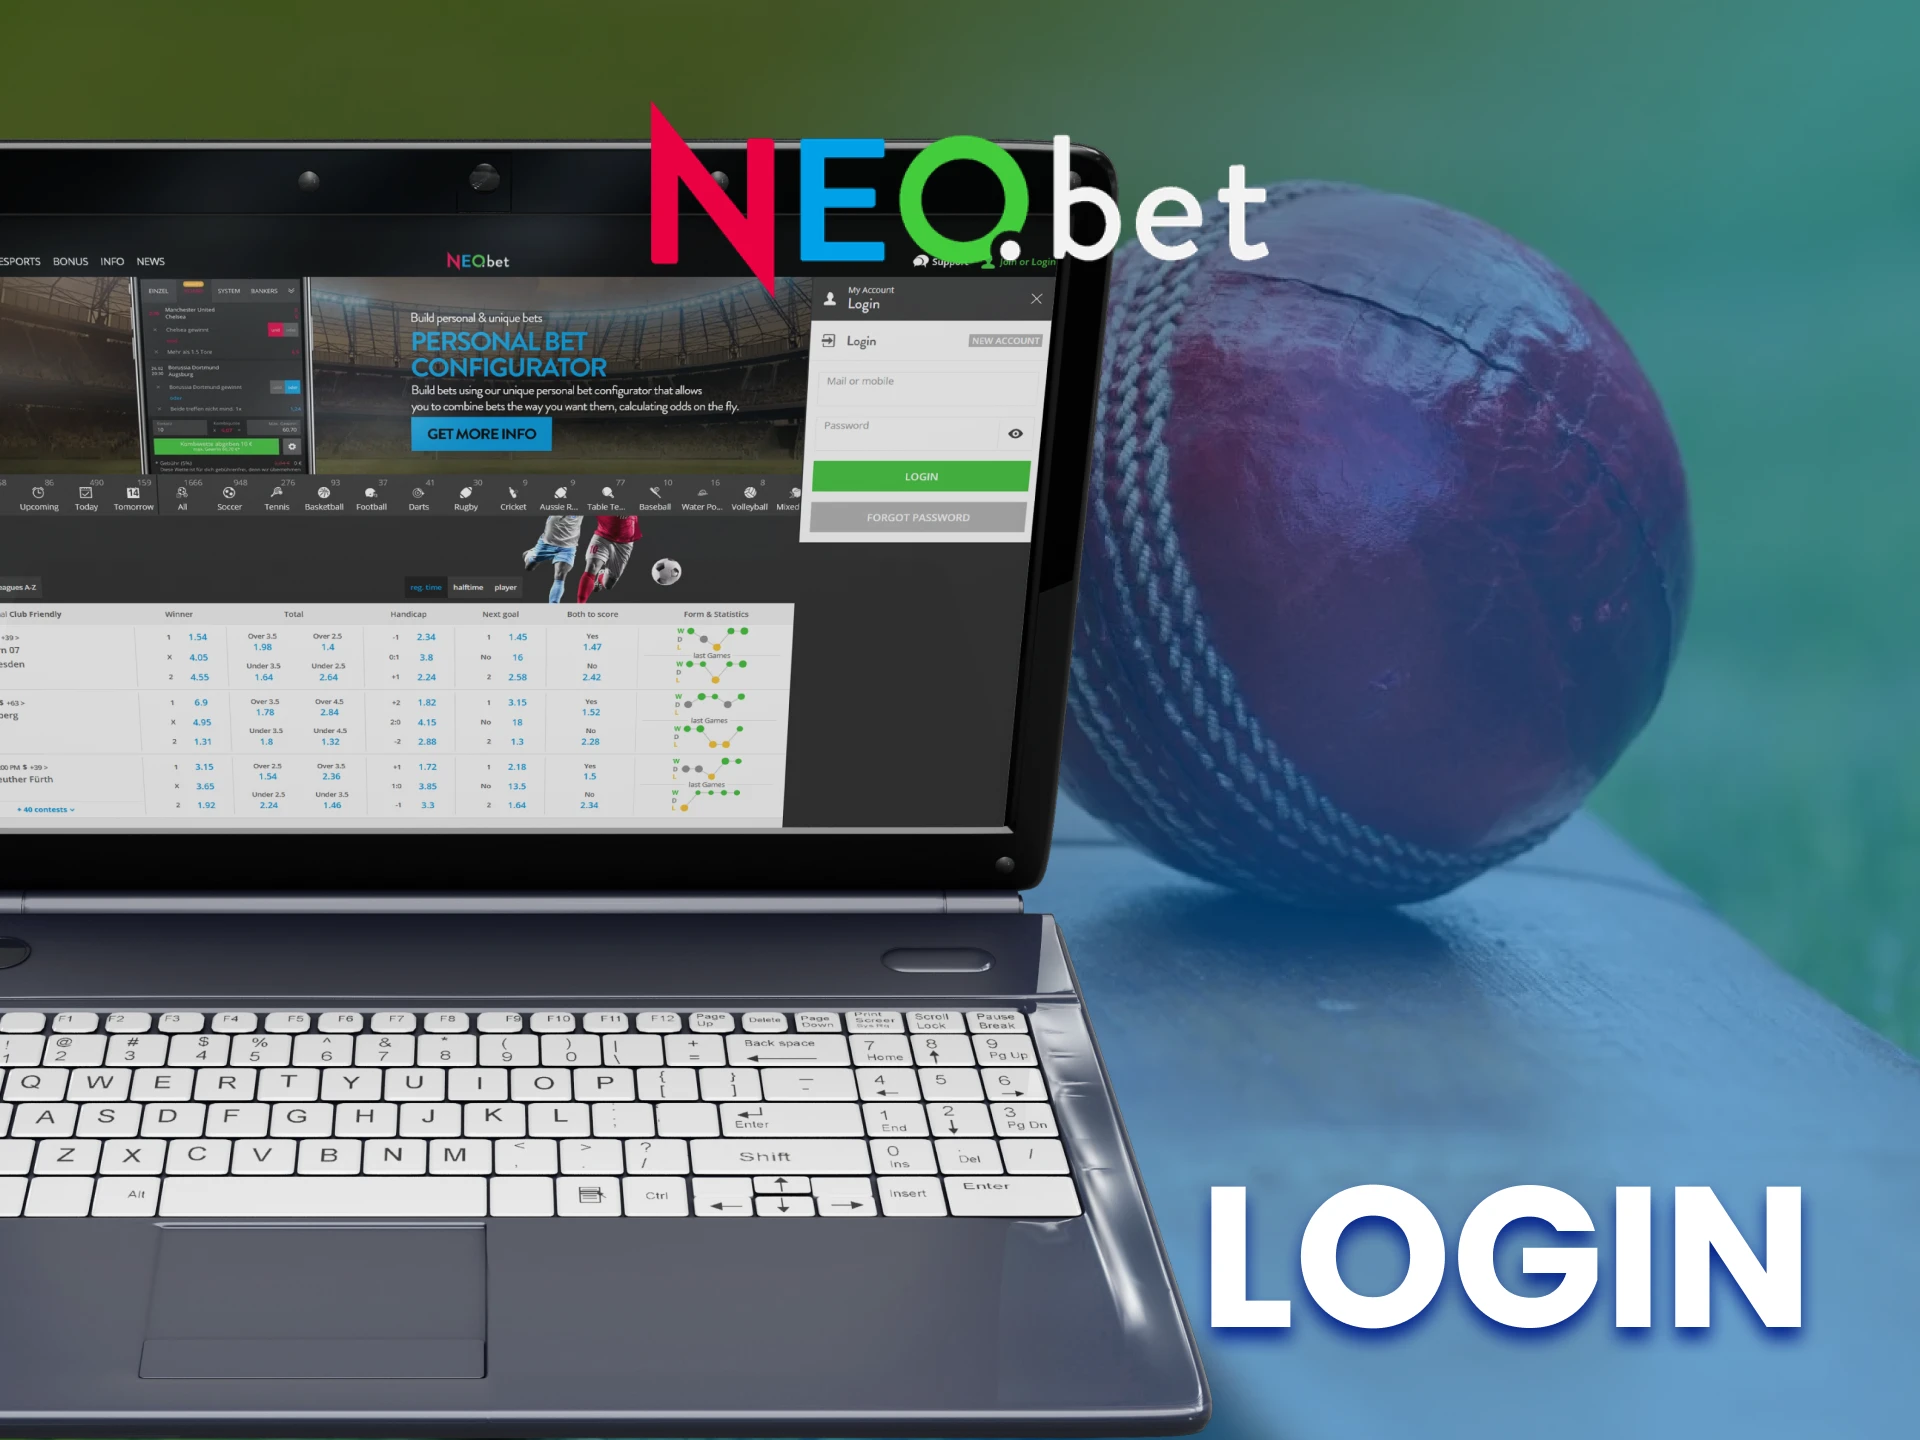 Log in to your NEO.bet account to access all features.